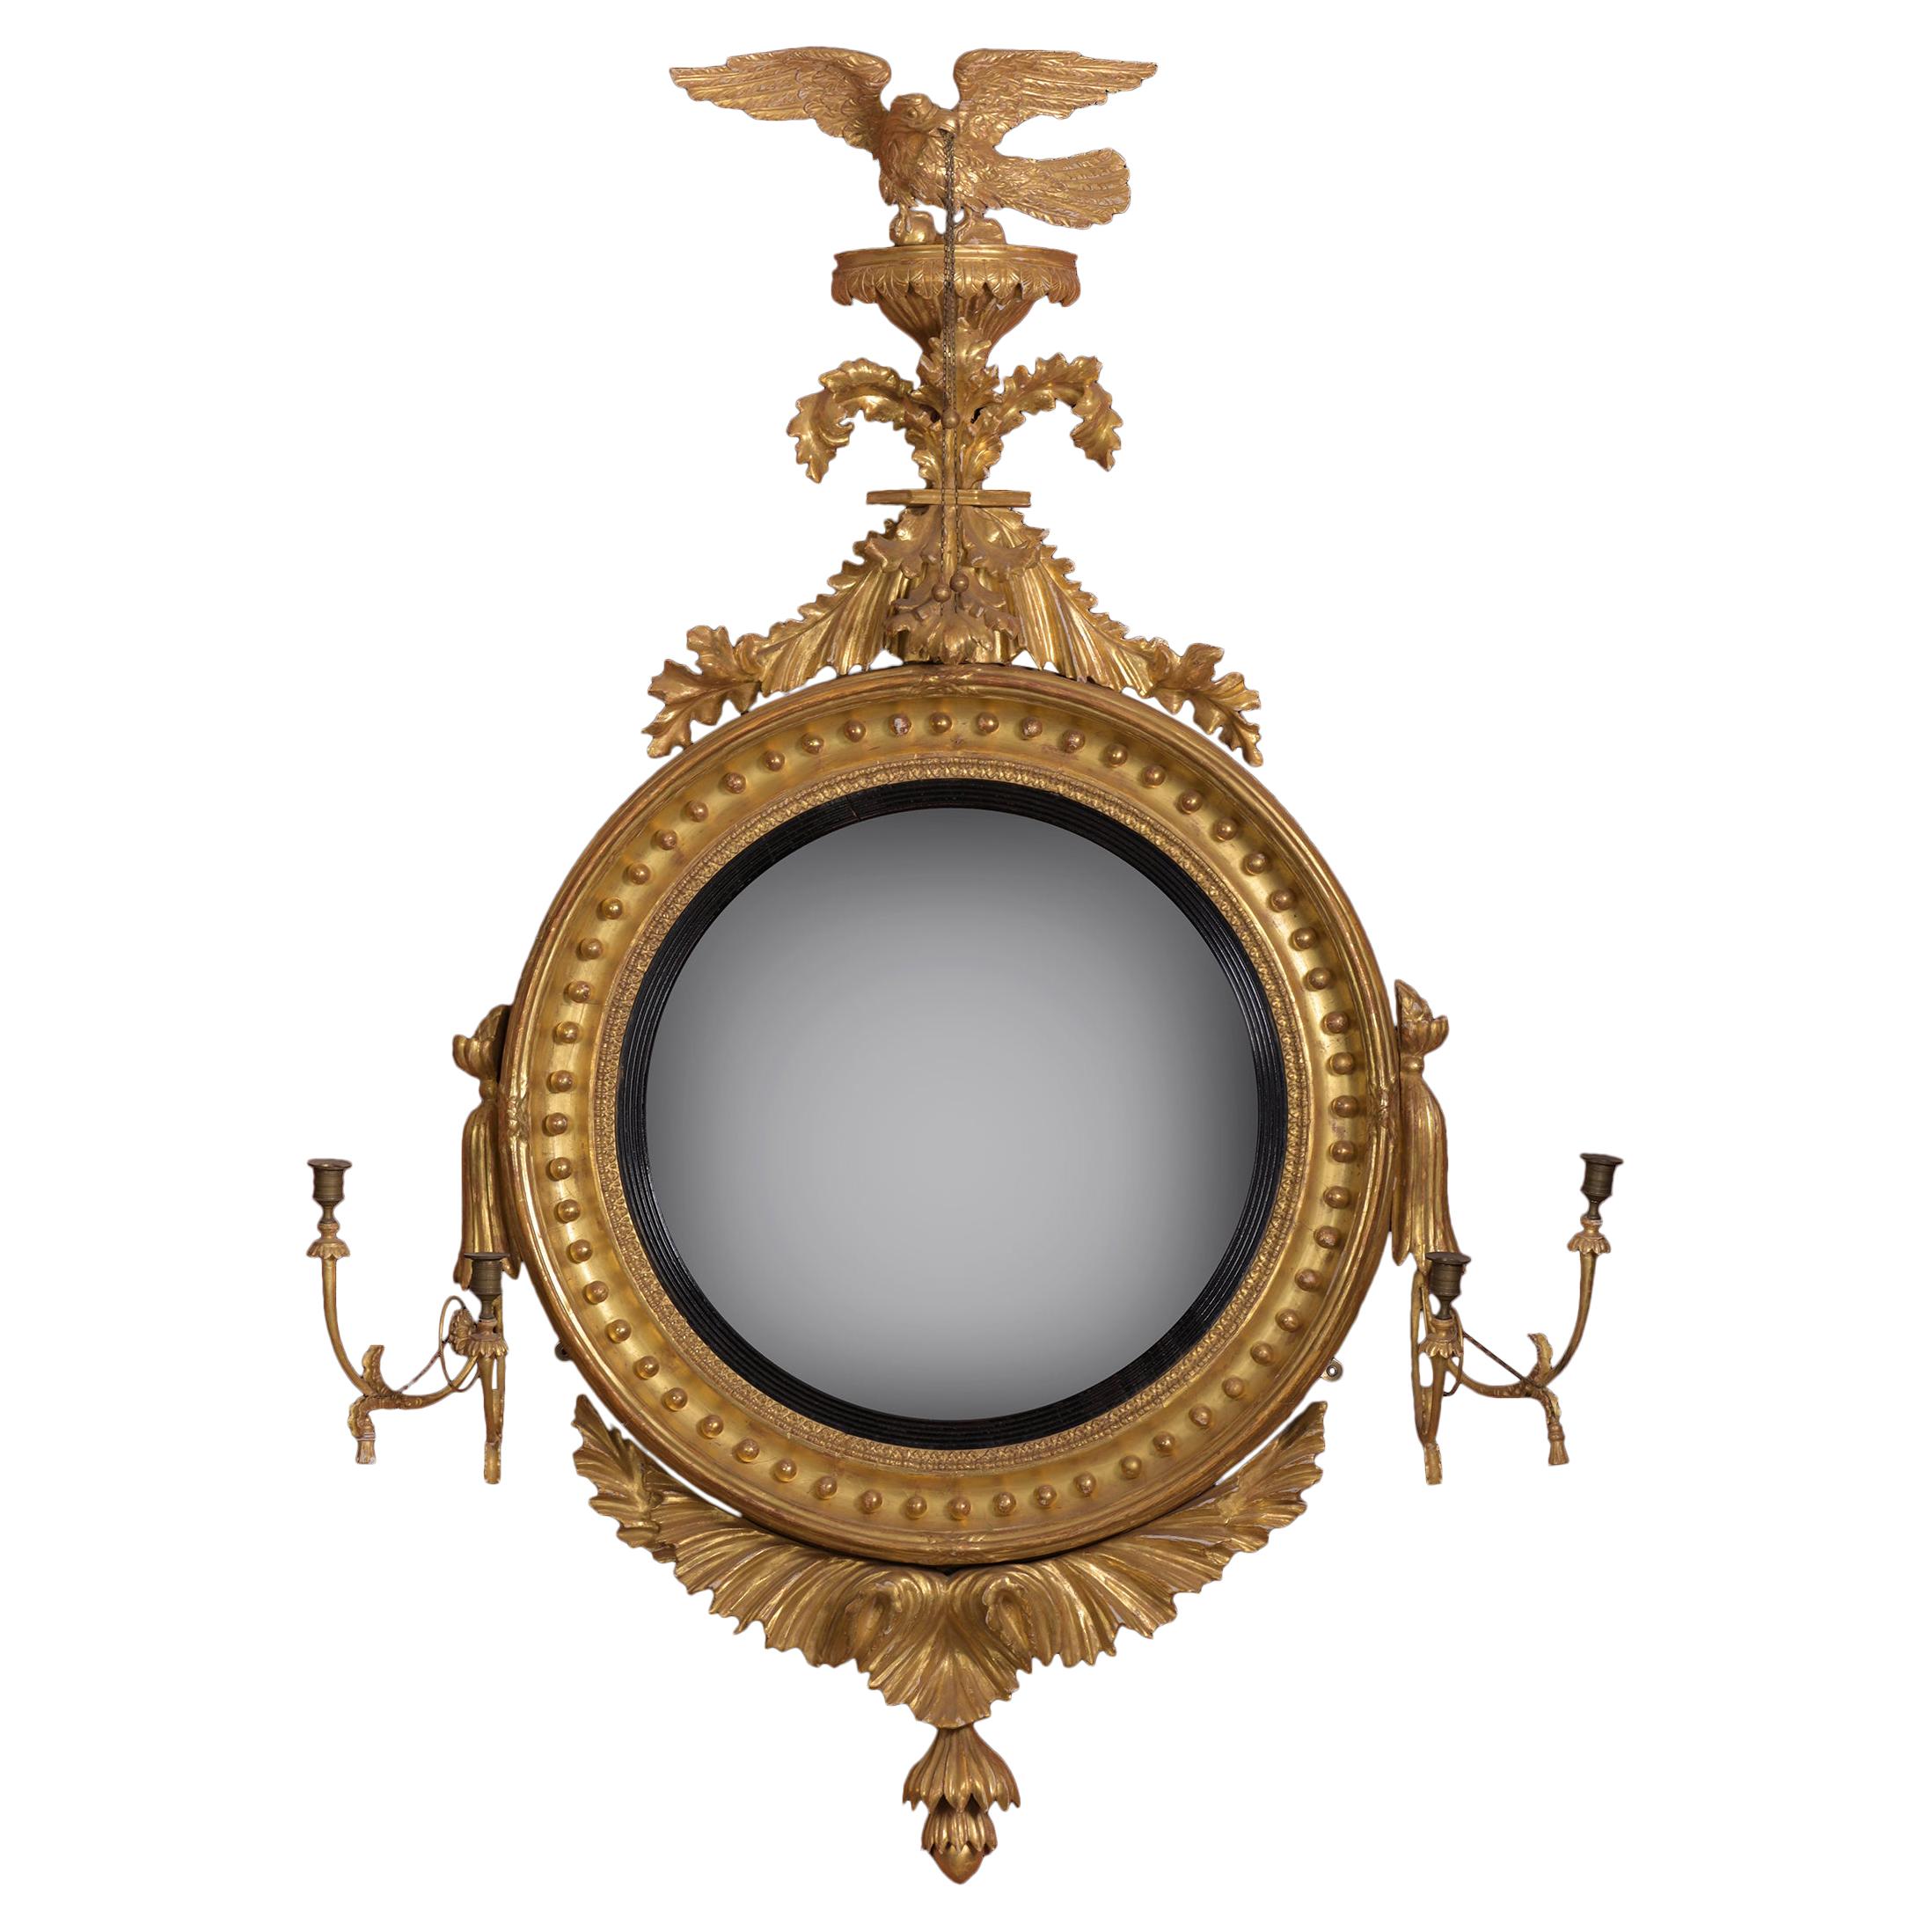 19th Century English Regency Carved Giltwood Convex Mirror For Sale